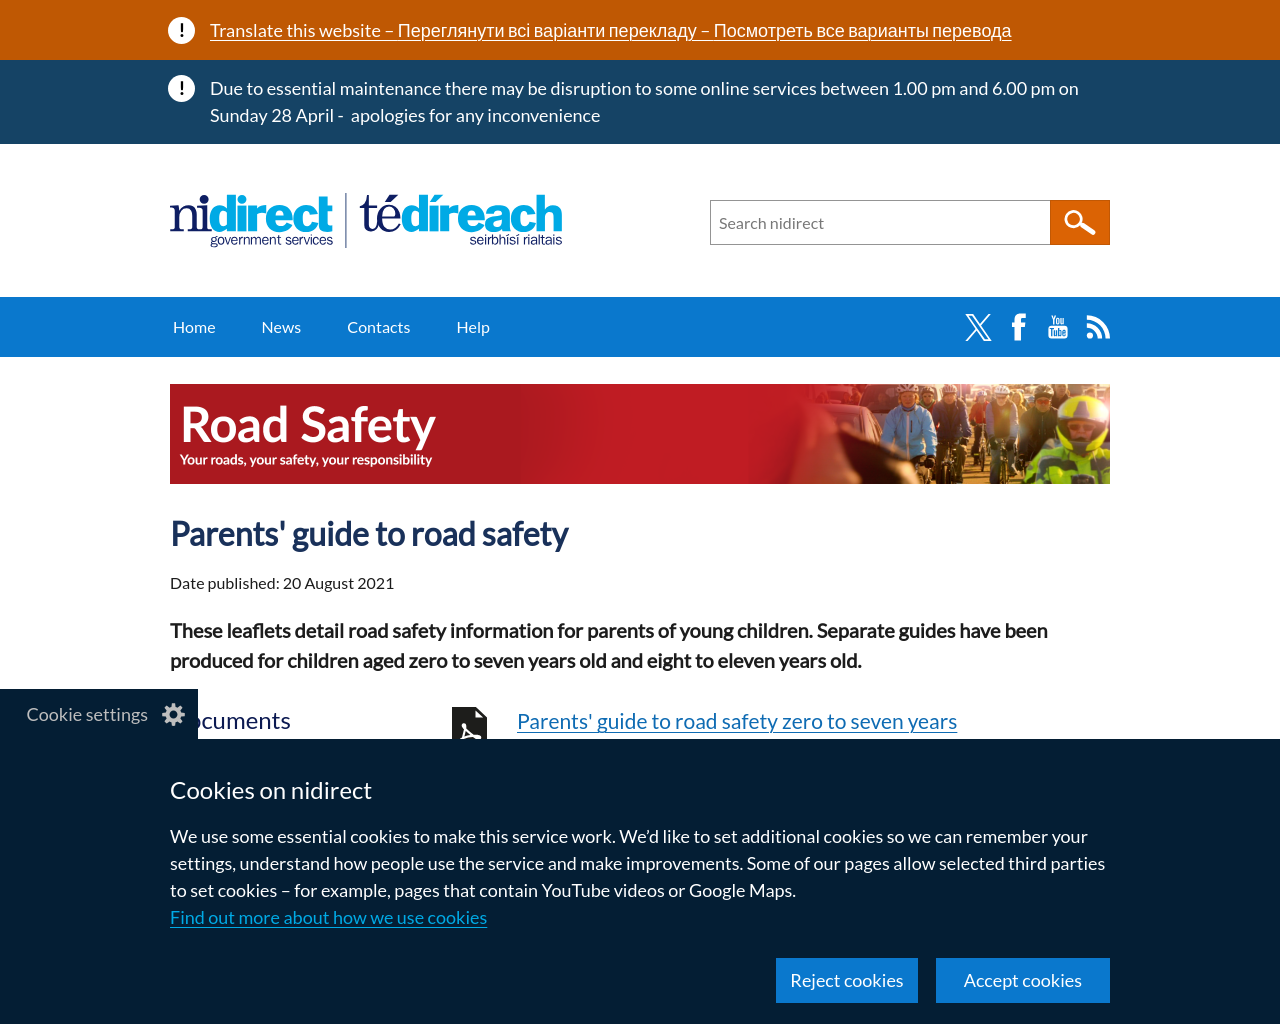 Road Safety Guides for Parents